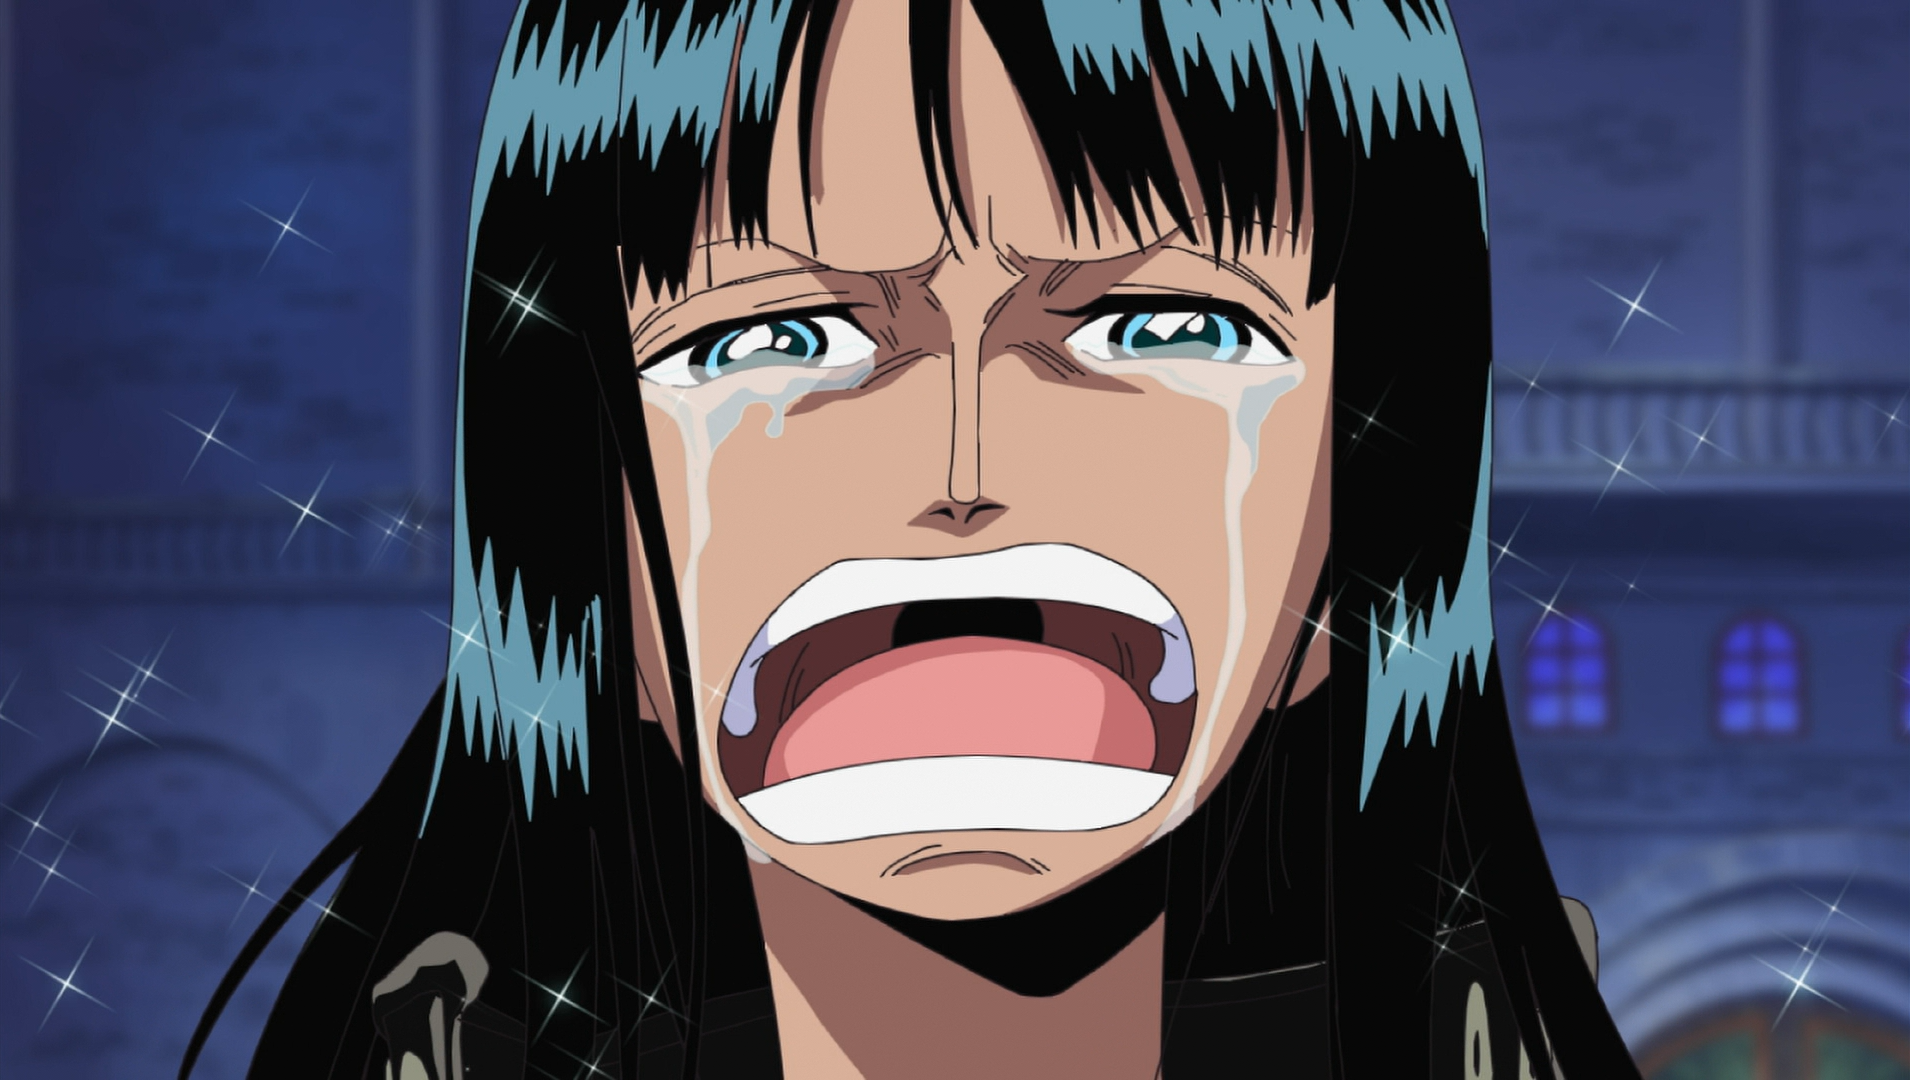 One Piece Manga Gets Emotional With Its Most Heartbreaking